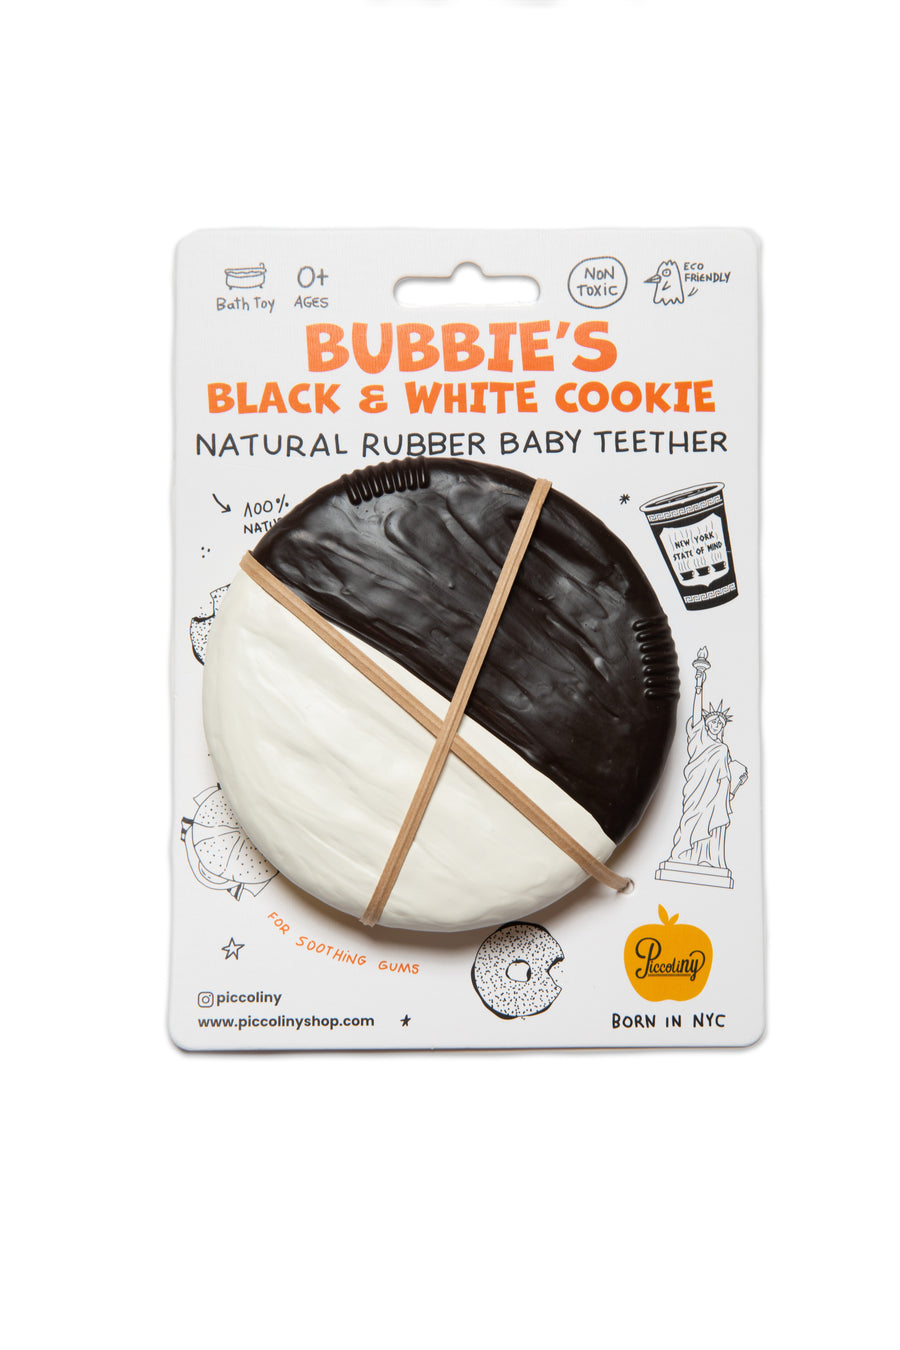 Bubbies Black & White Cookie Teether